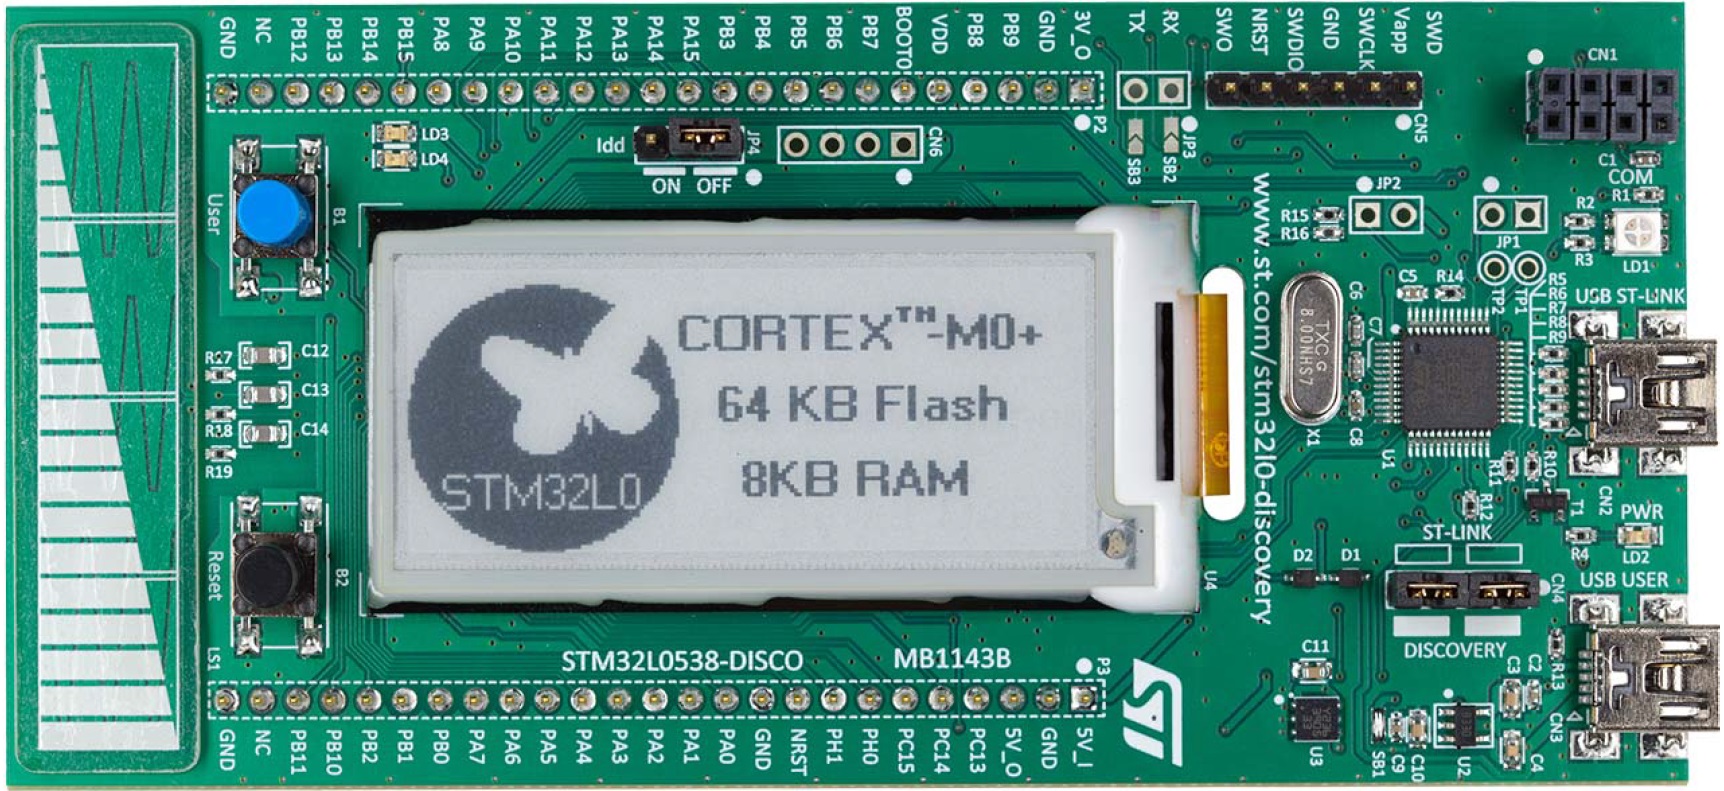 The STM32L053 Discovery board.jpg